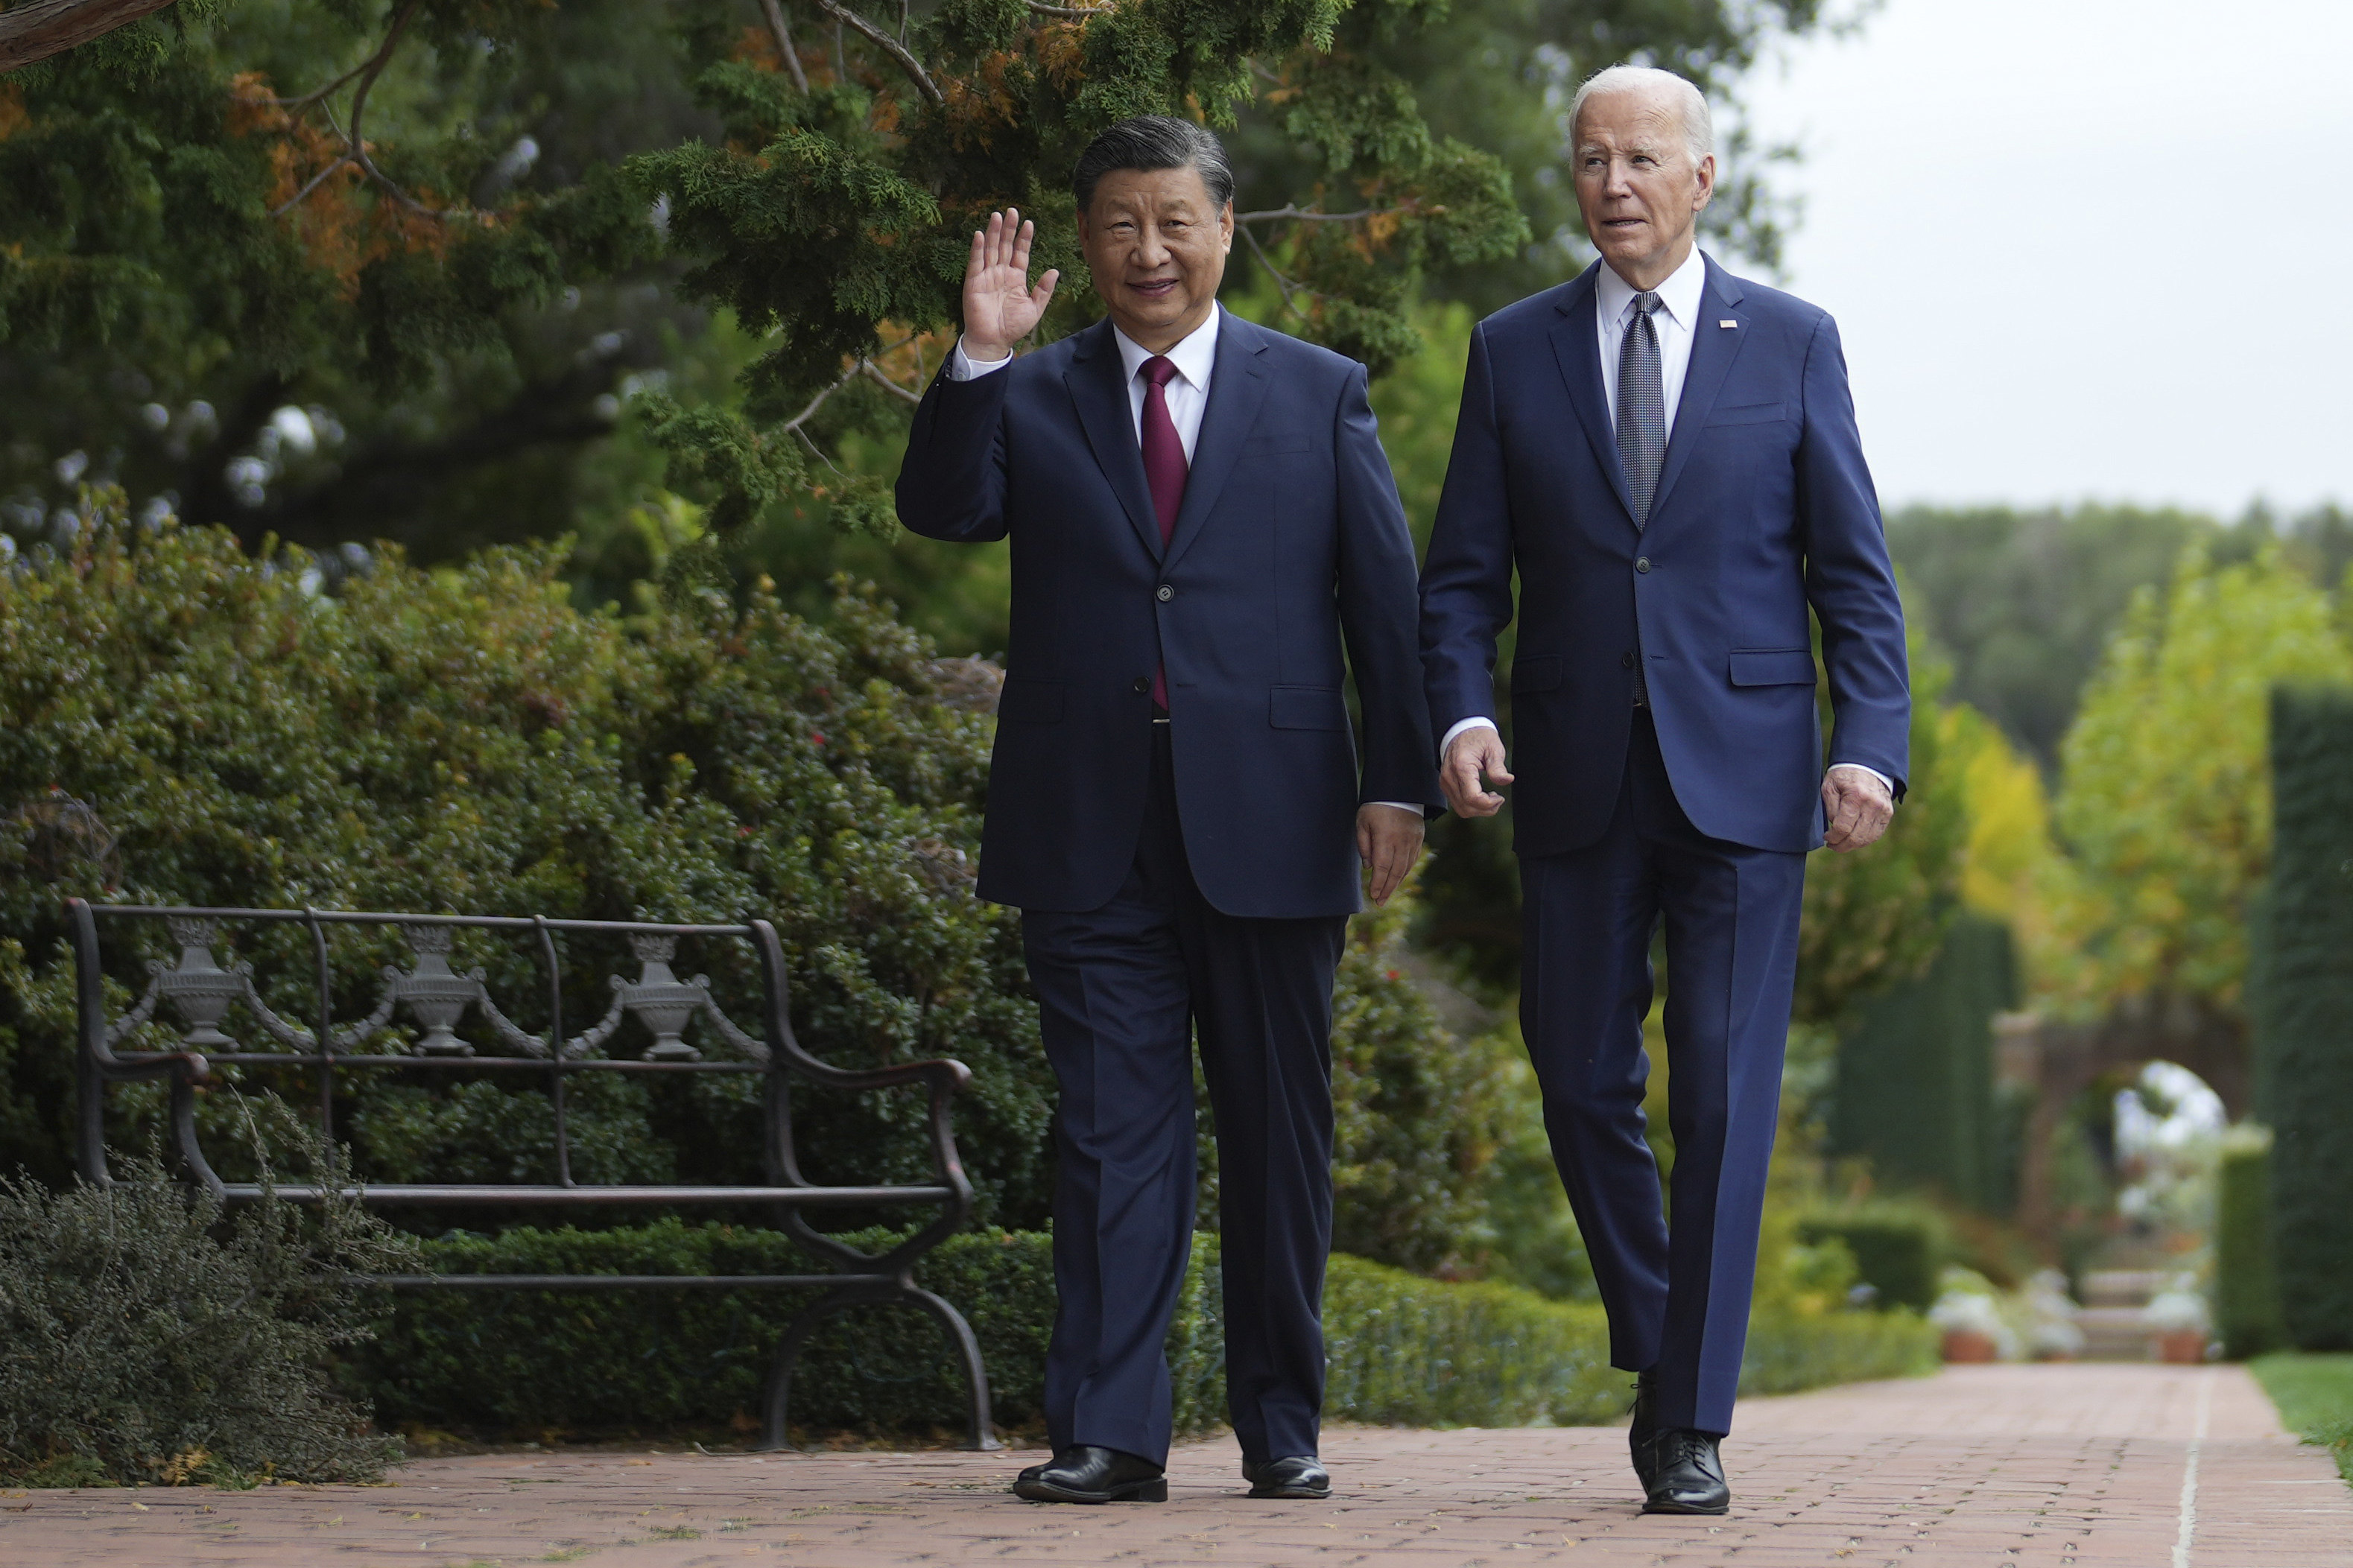 The launch of the US-China counternarcotics working group was first announced after a meeting between Chinese President Xi Jinping and US President Joe Biden in San Francisco in November last year. Photo: The New York Times via AP pool)